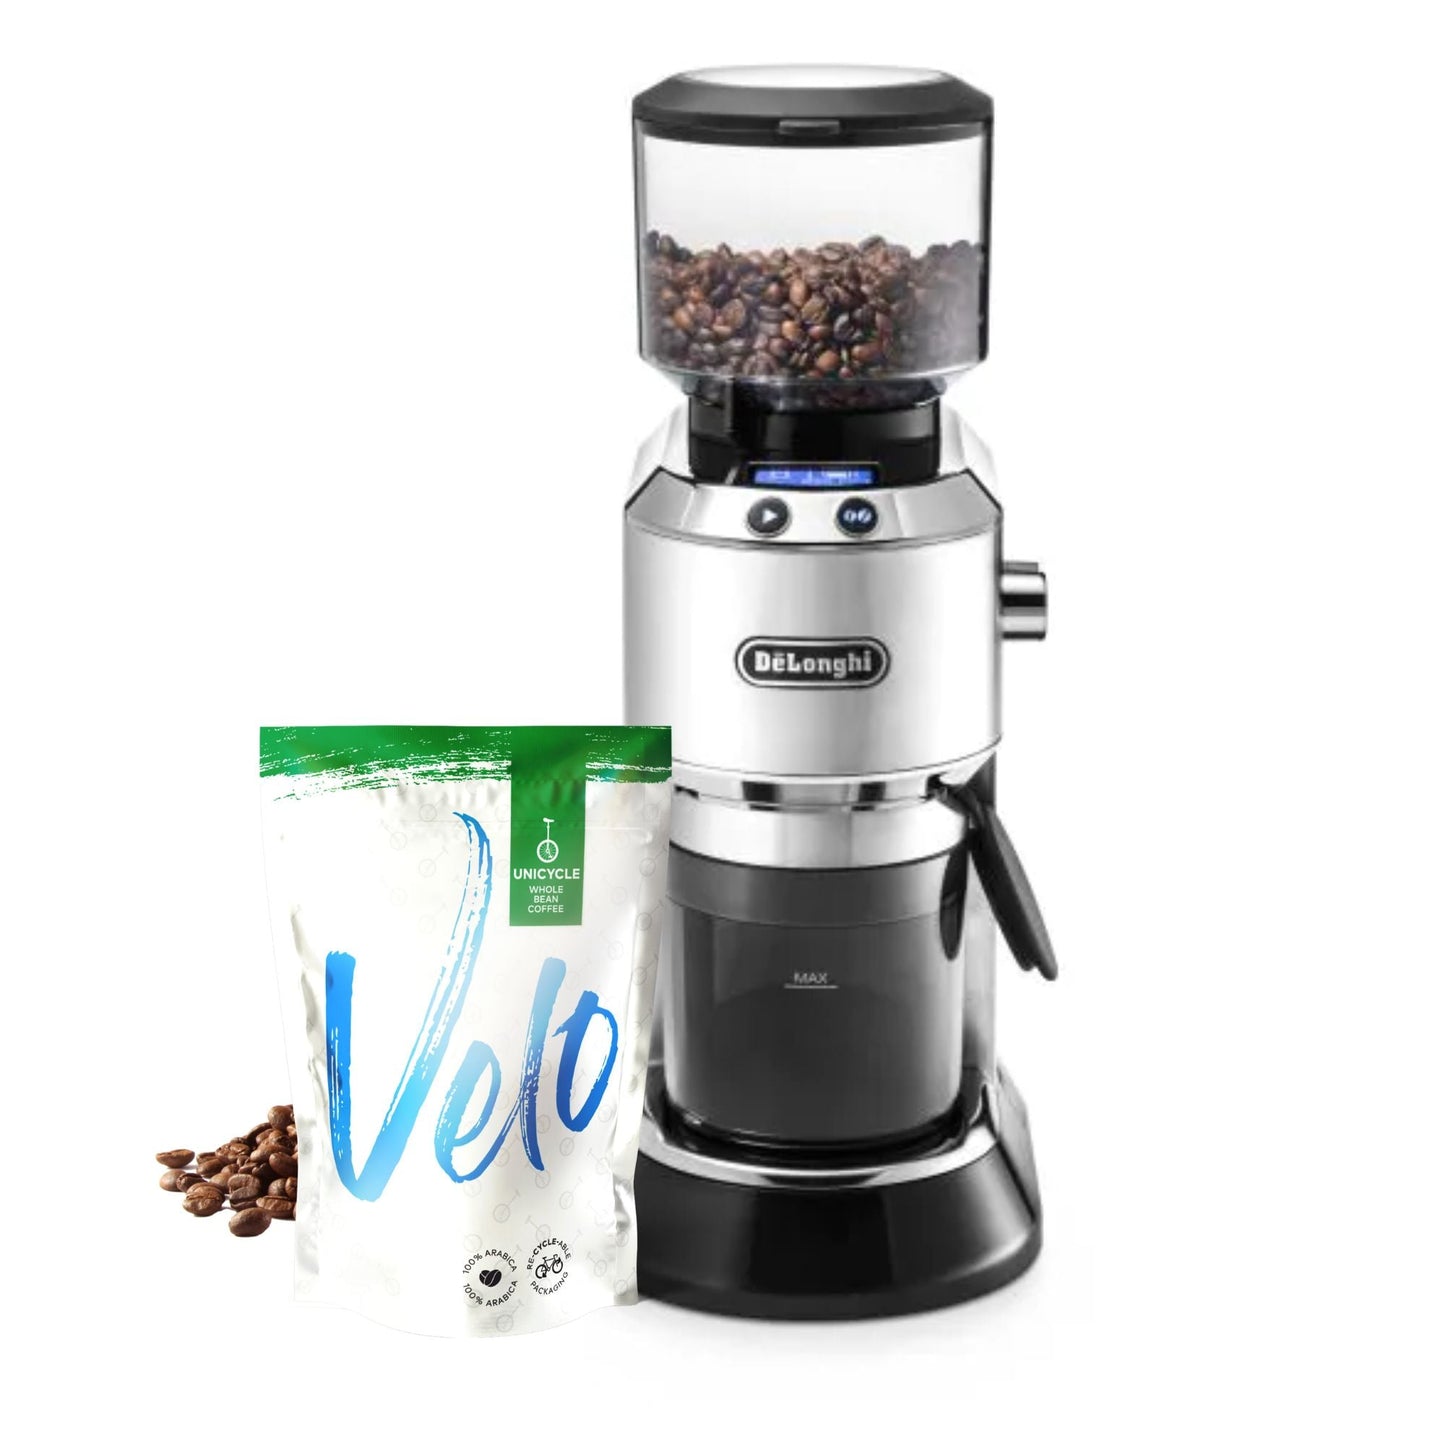 De'Longhi Dedica Digital Coffee Bean Grinder - KG521.M - Stainless Steel body with Black Plastic Base and Clear Bean hopper on top Velo  with touchcreen , Buttons on Body and dial on the side Coffee Roasters